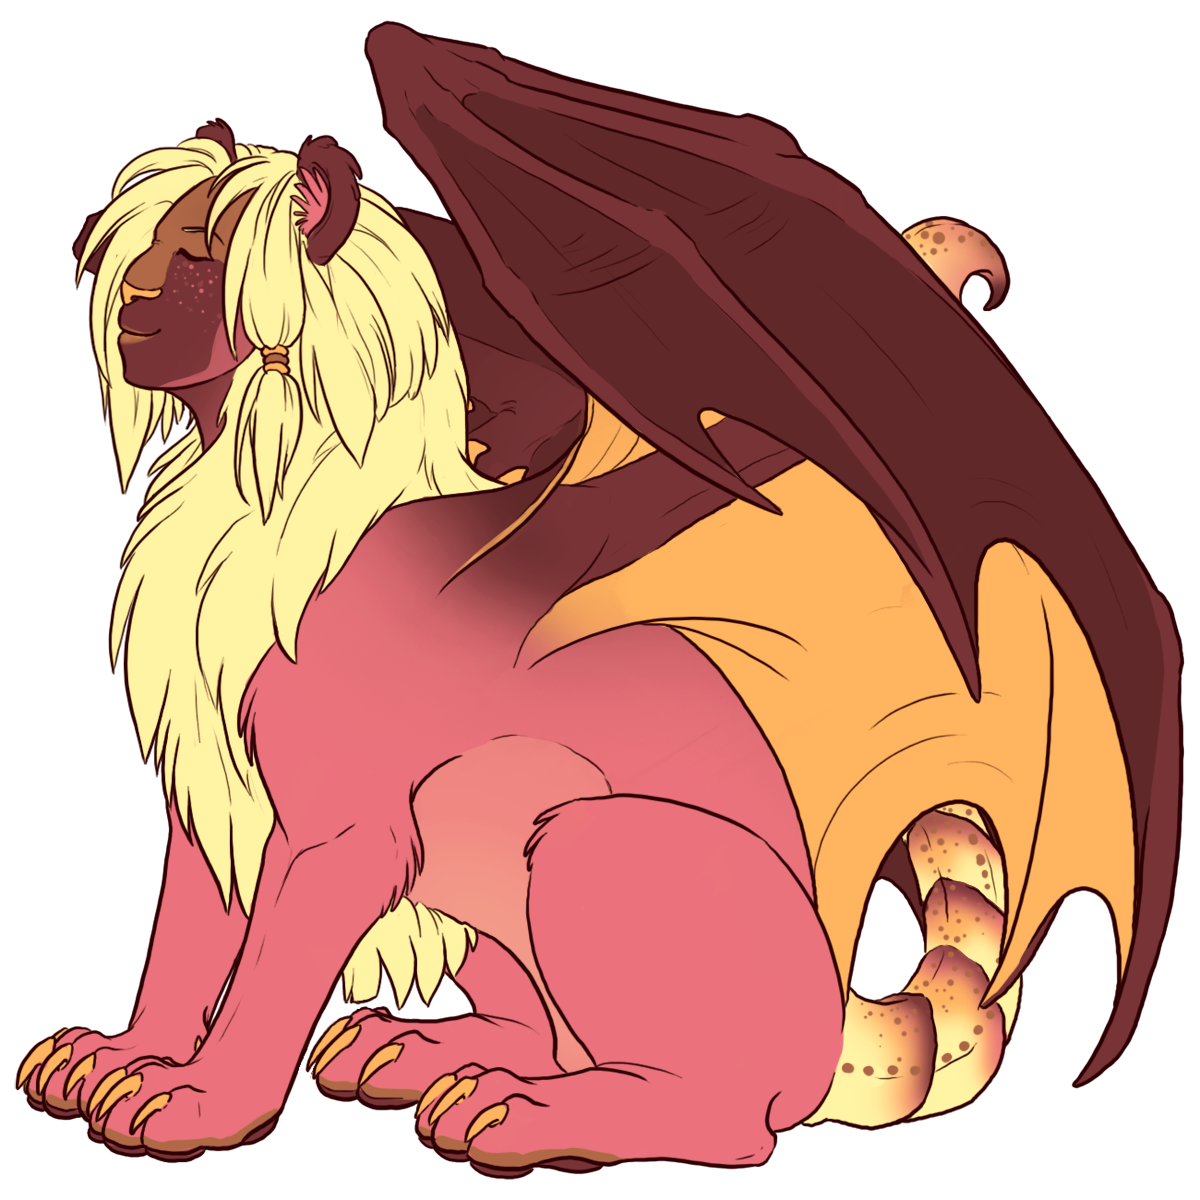 manticore3_by_nin_wolf-d9kw0ve.png